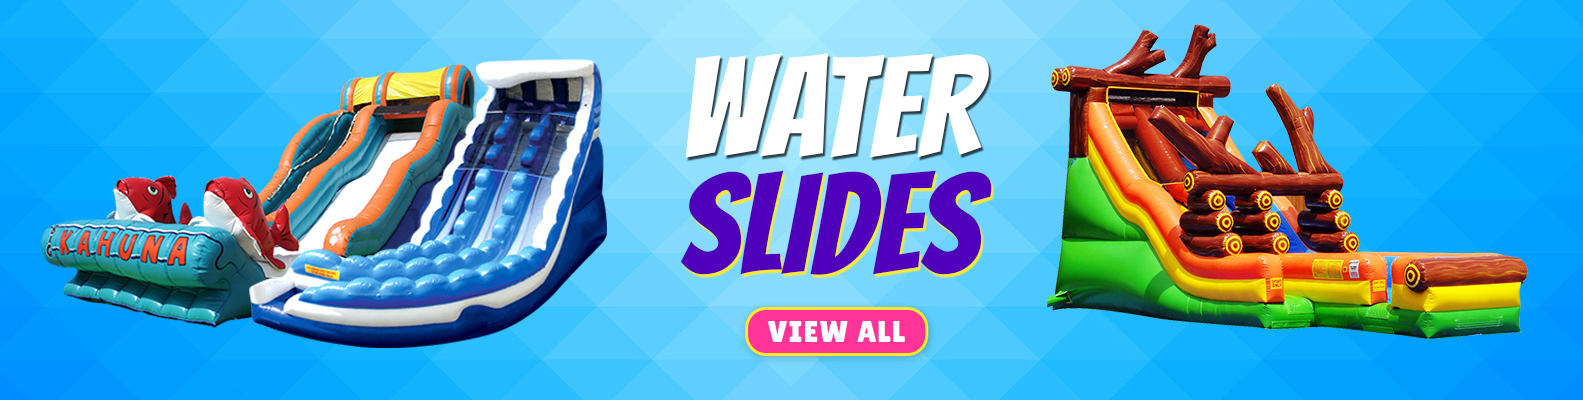 inflatable water slide rentals in Avondale